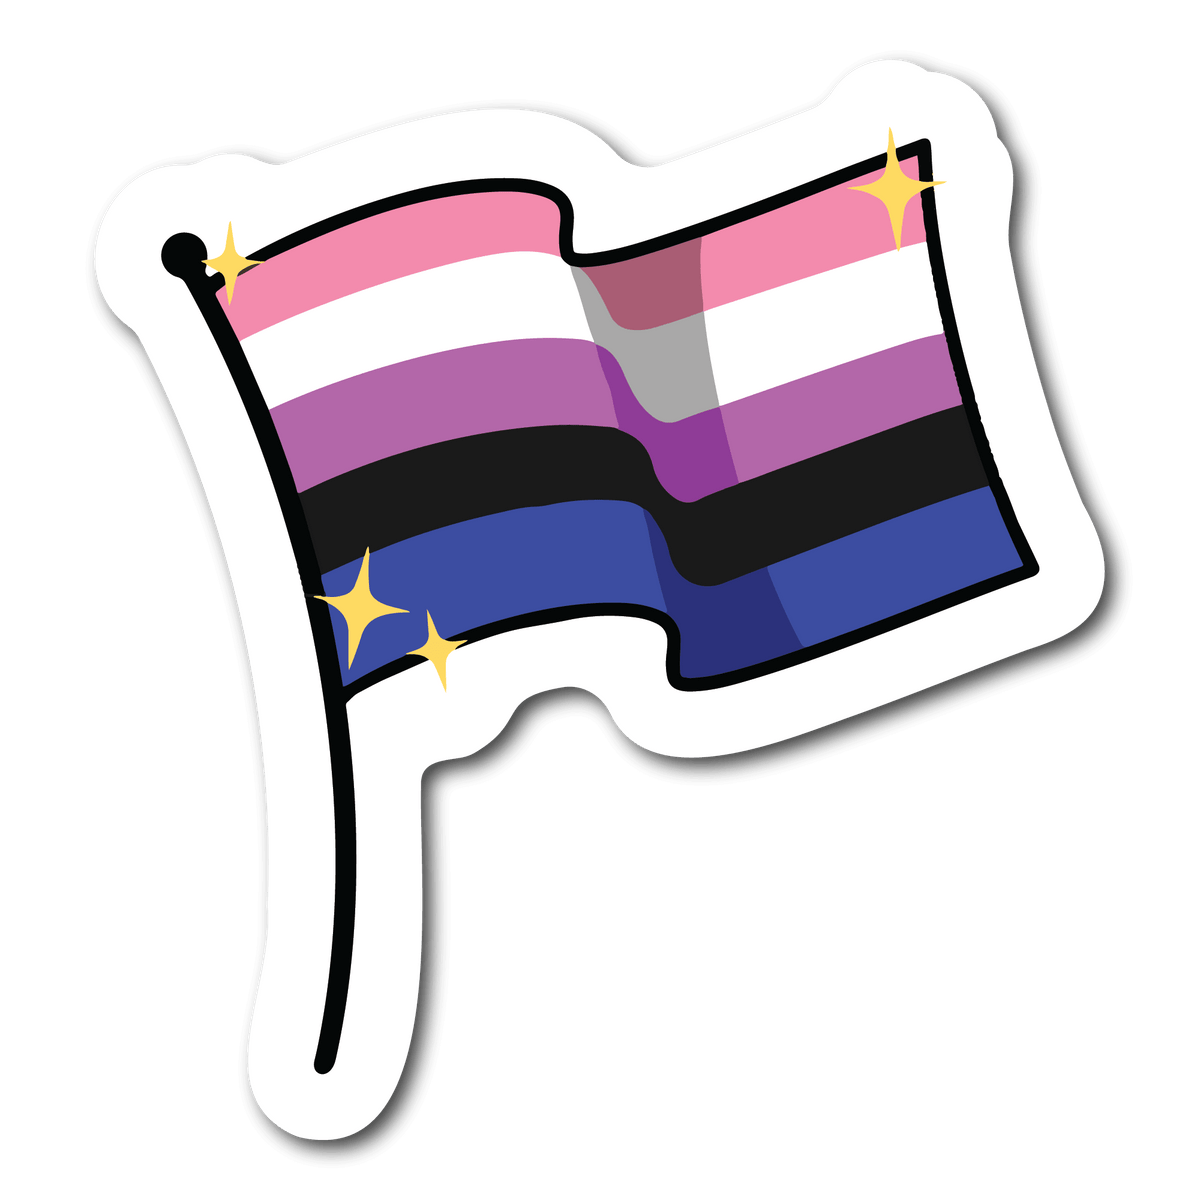 Small Gender Fluid Pride Flag Waterproof Sticker for LGBTQ Name Tags